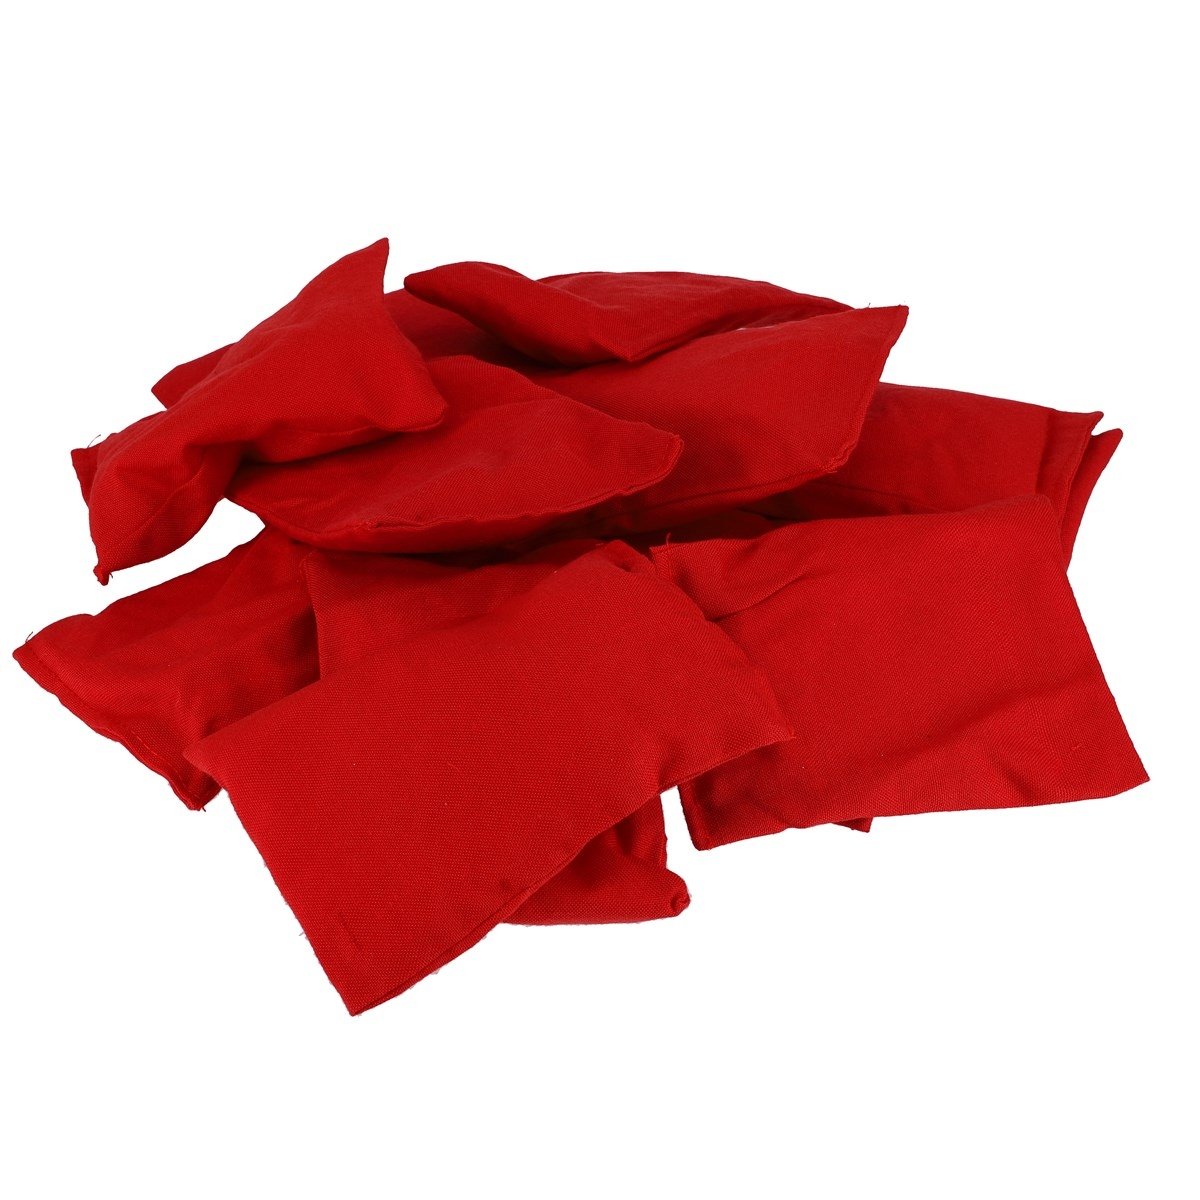 Beanbags Red Pack 12, Brightly coloured beanbags that can be used for an endless variety of games and activities. Made from a soft cotton outer, these beanbags are soft so reduce the fear of catching. Cotton twill outer. Second inner bag for extra safety. Non-toxic filling of foam and plastic grains. Dimensions: 12 x 8cm. Age suitability: 3 years +. Warning!: Not suitable for children under 3 years. Contains small parts. Choking hazard. Learning Outcomes Gross motor skills Co-ordination Sorting skills Team 